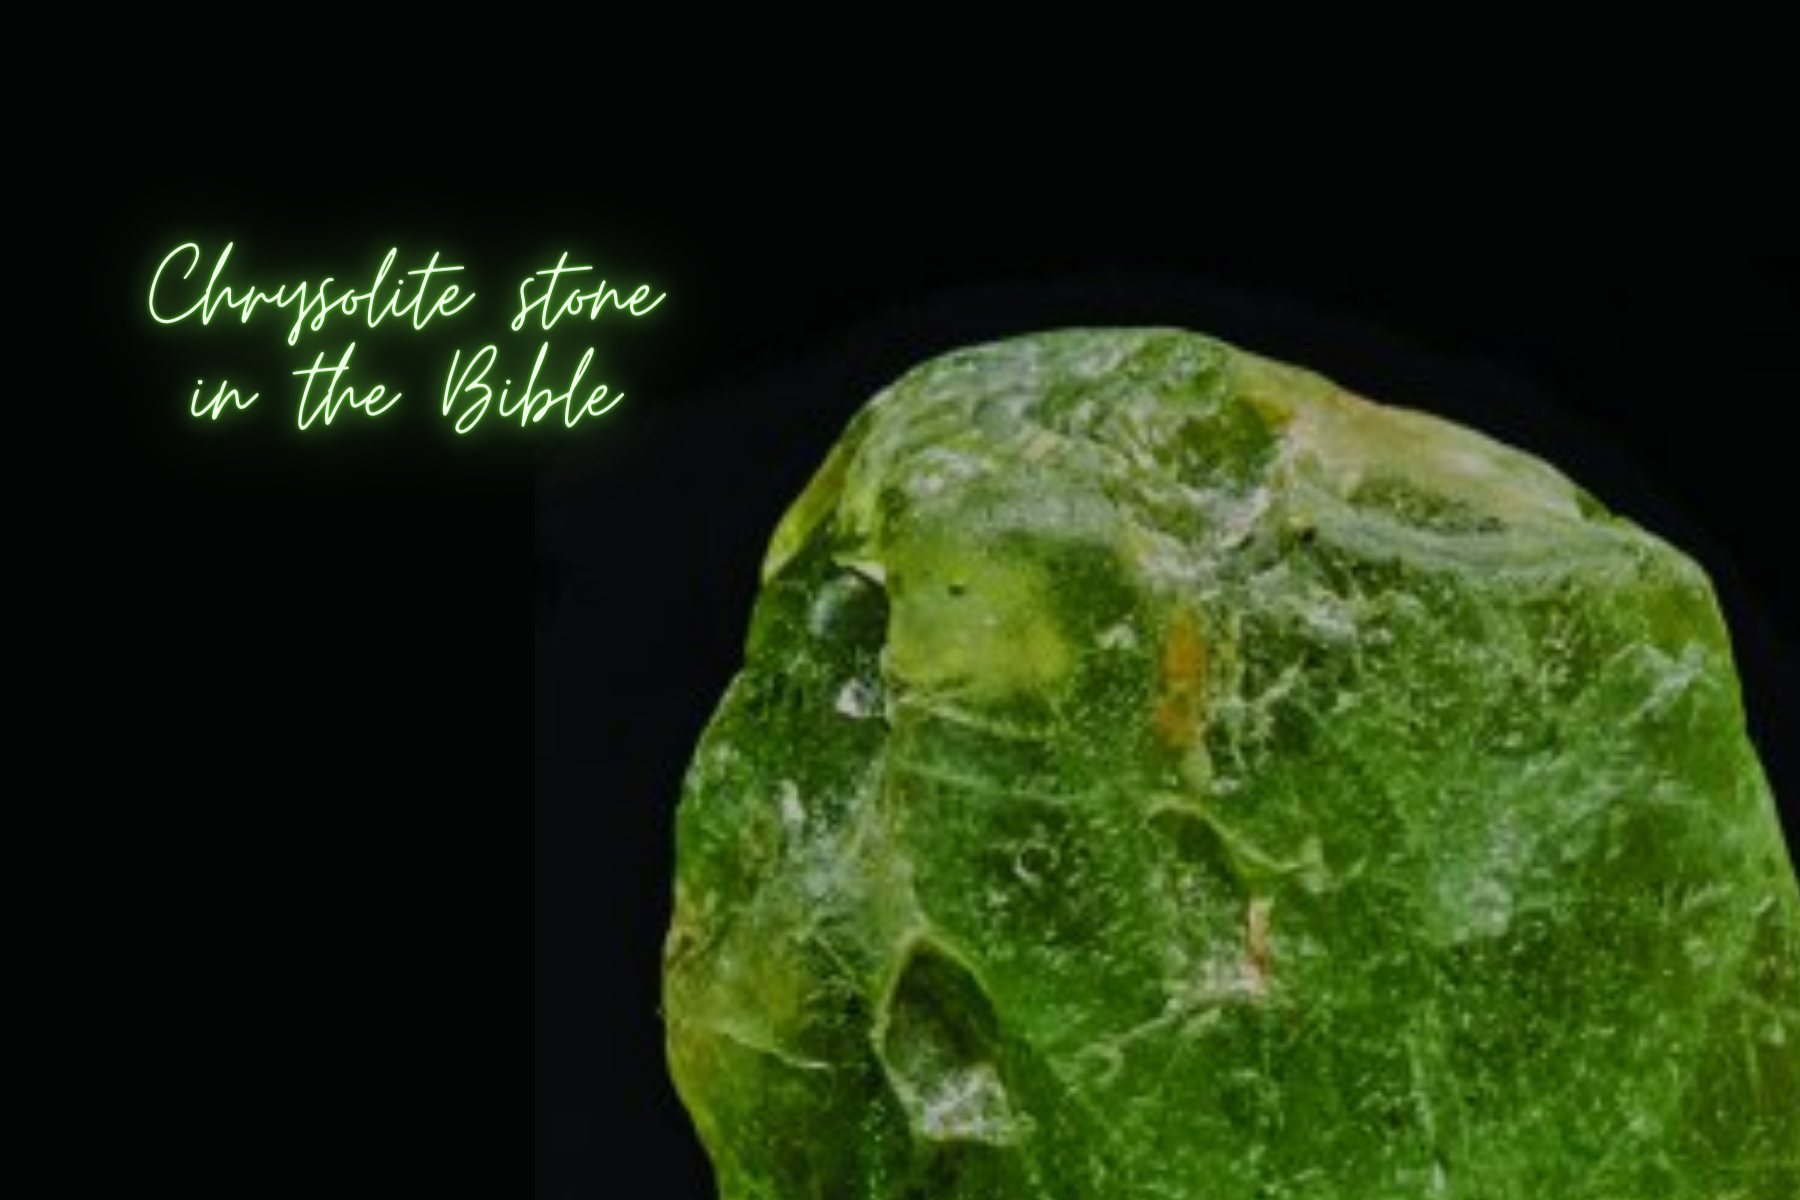 Chrysolite Stone In The Bible - A Gem Of Great Spiritual Value